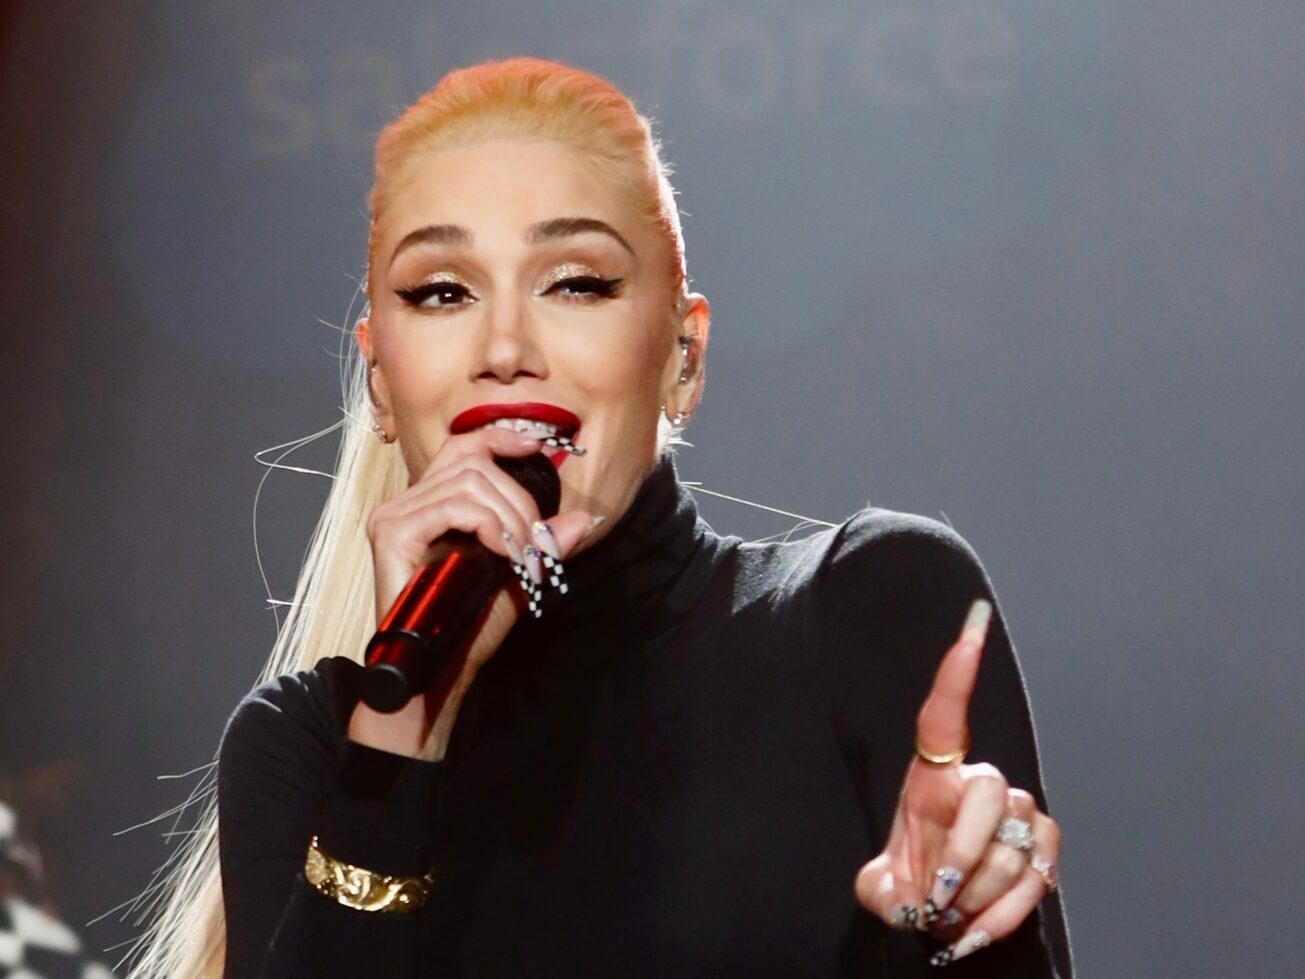 Gwen Stefani performs at the annual Salesforce conference.